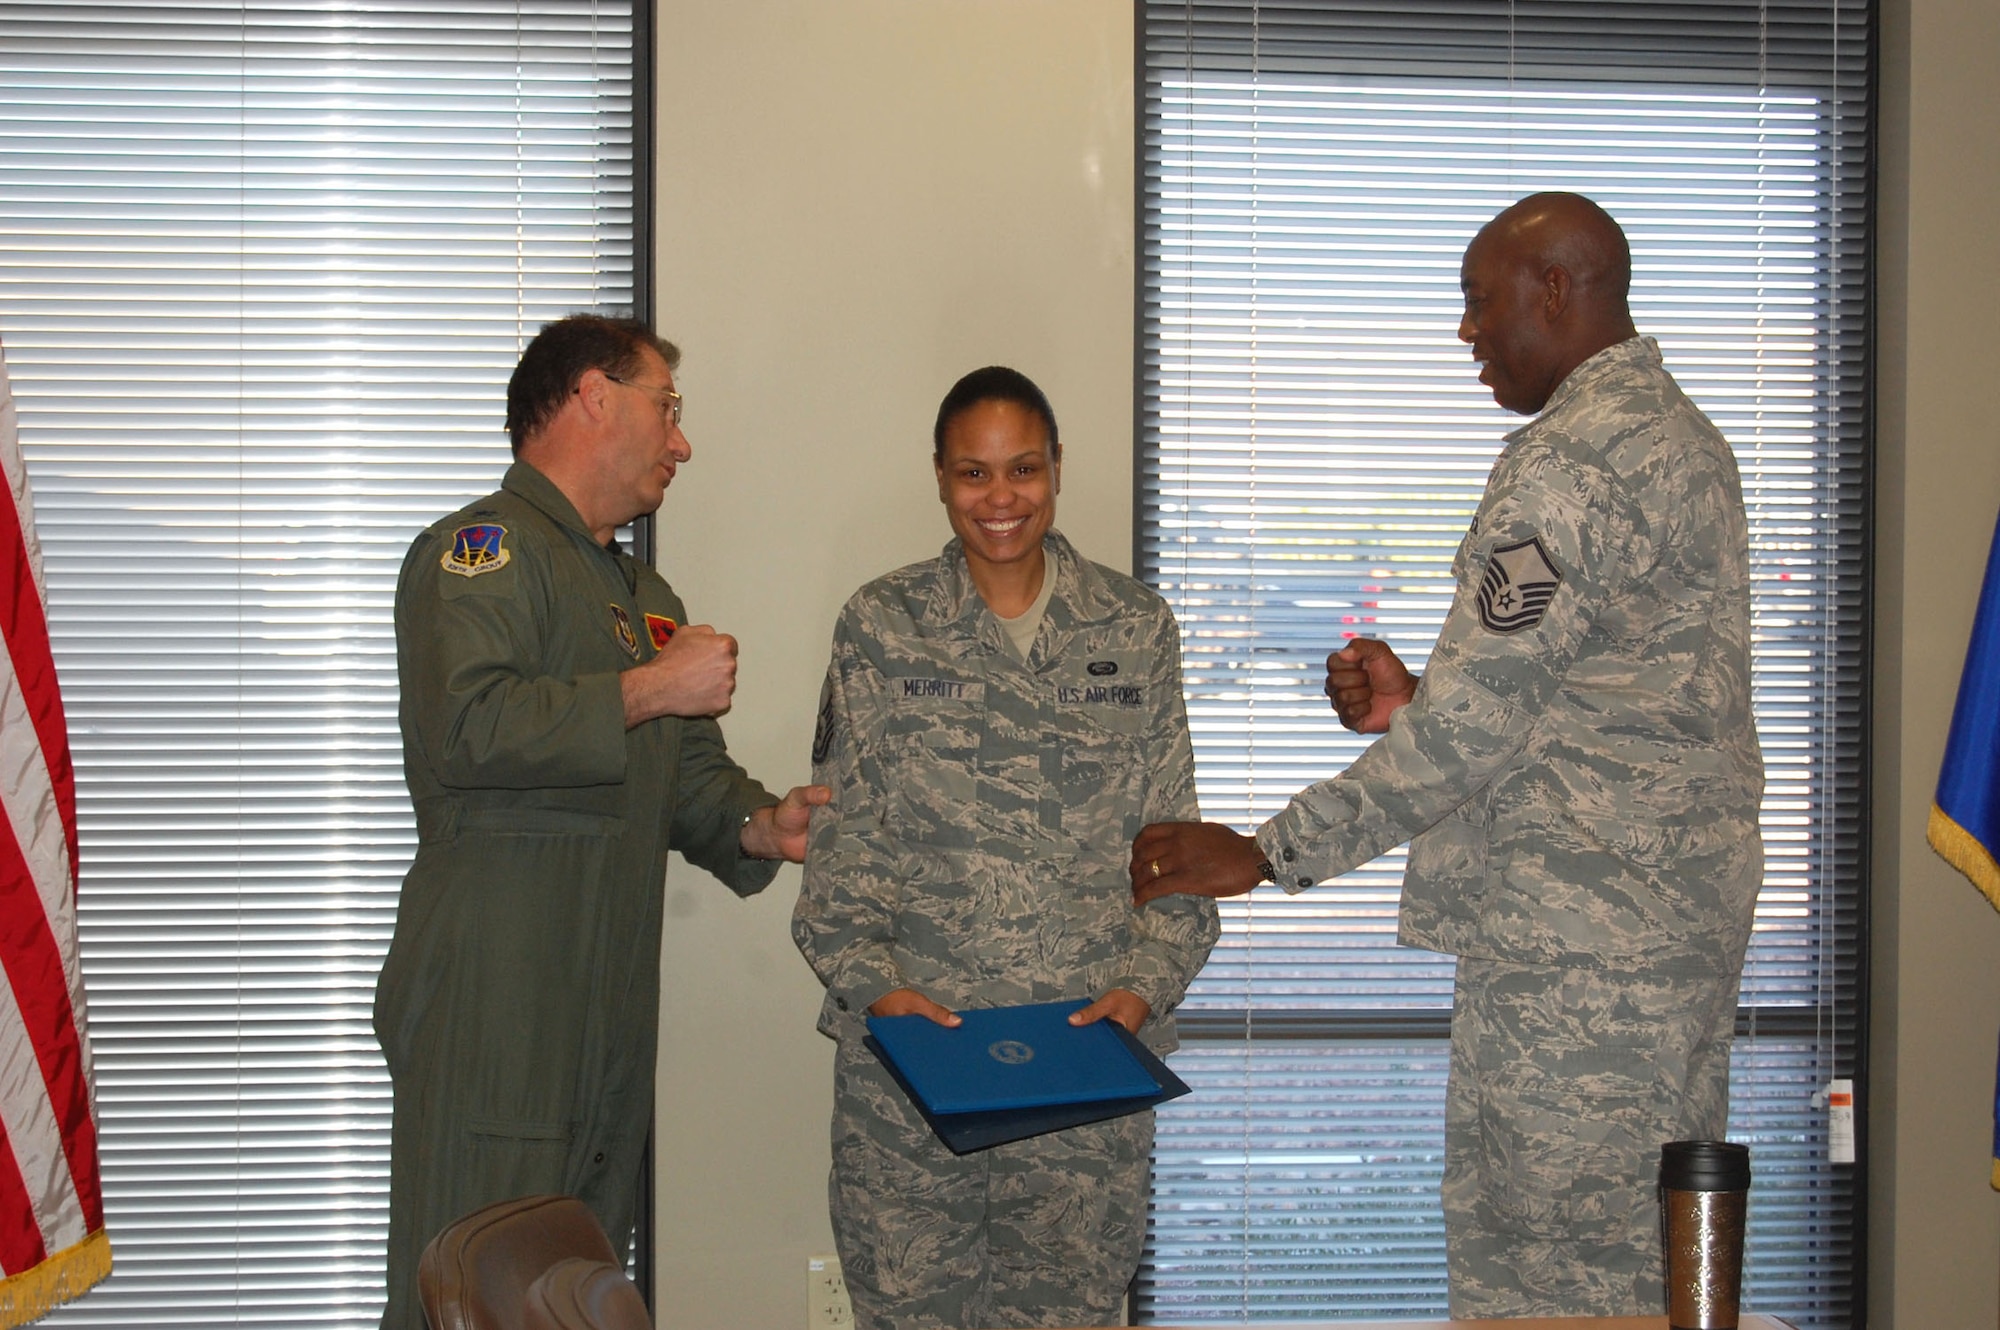 NELLIS AIR FORCE BASE, Nev. -- (Center) Master Sgt. Aisha Merritt has her new rank tacked on by Col. Herman Brunke, 926th Group commander, and Master Sgt. Phillip Hayes, 926th Group first sergeant, during her promotion ceremony here Feb. 1. Sergeant Merritt is a personnel specialist with the 706th Fighter Squadron. (U.S. Air Force photo/Capt. Jessica Martin)